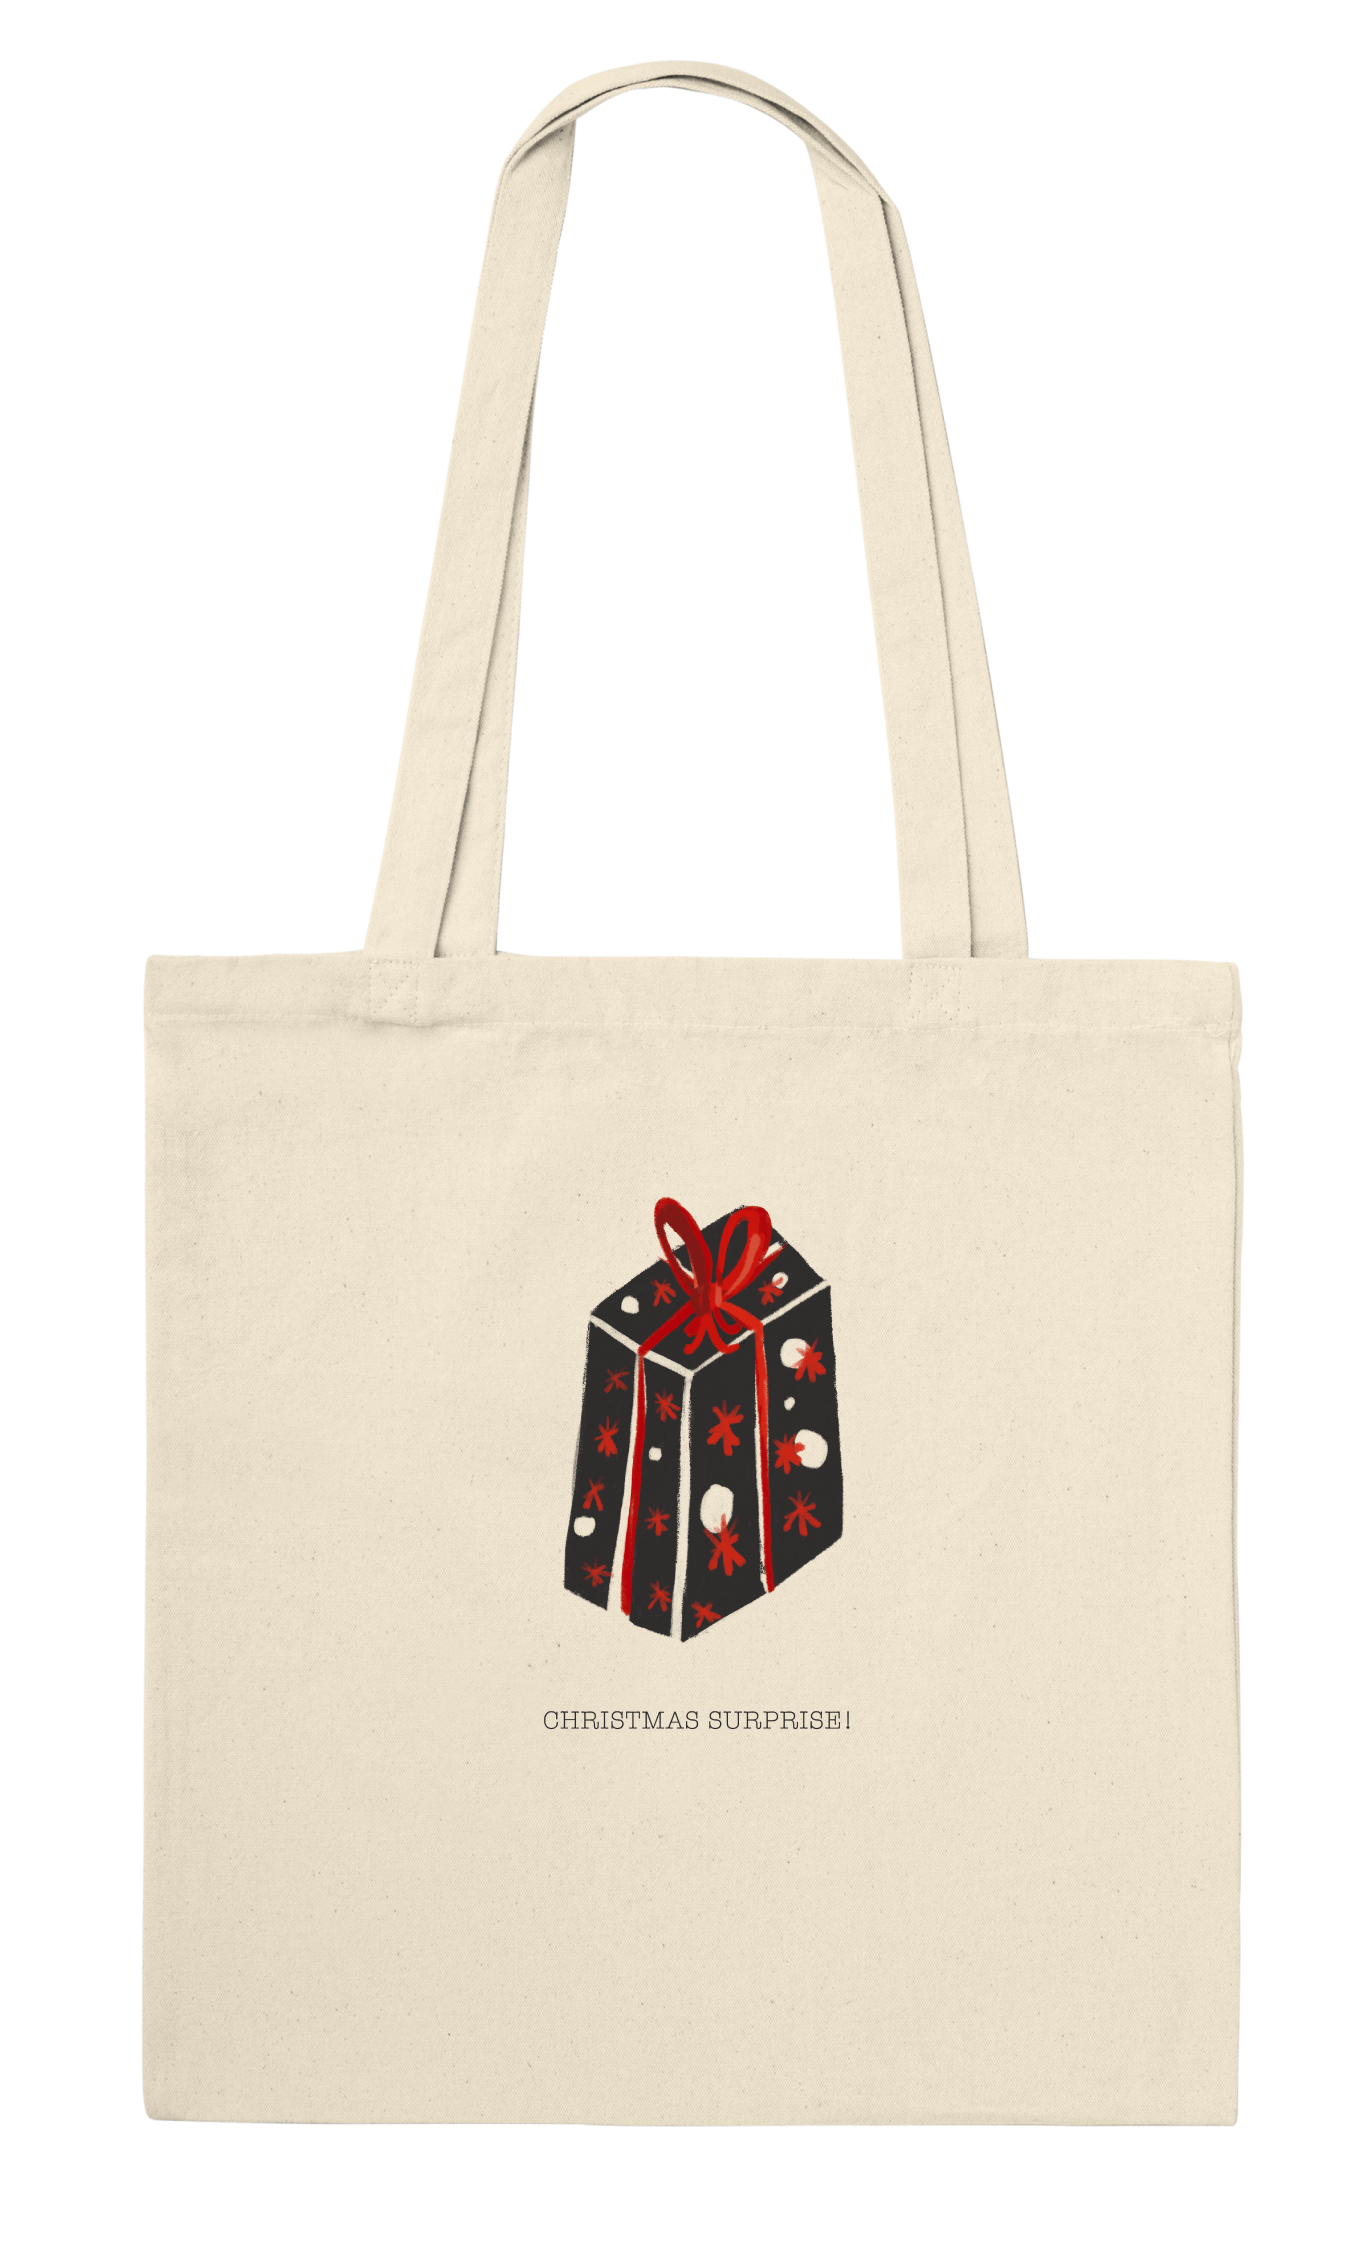 Christmas Surprise Tote Bag -  クリスマスプレゼントトートバッグ